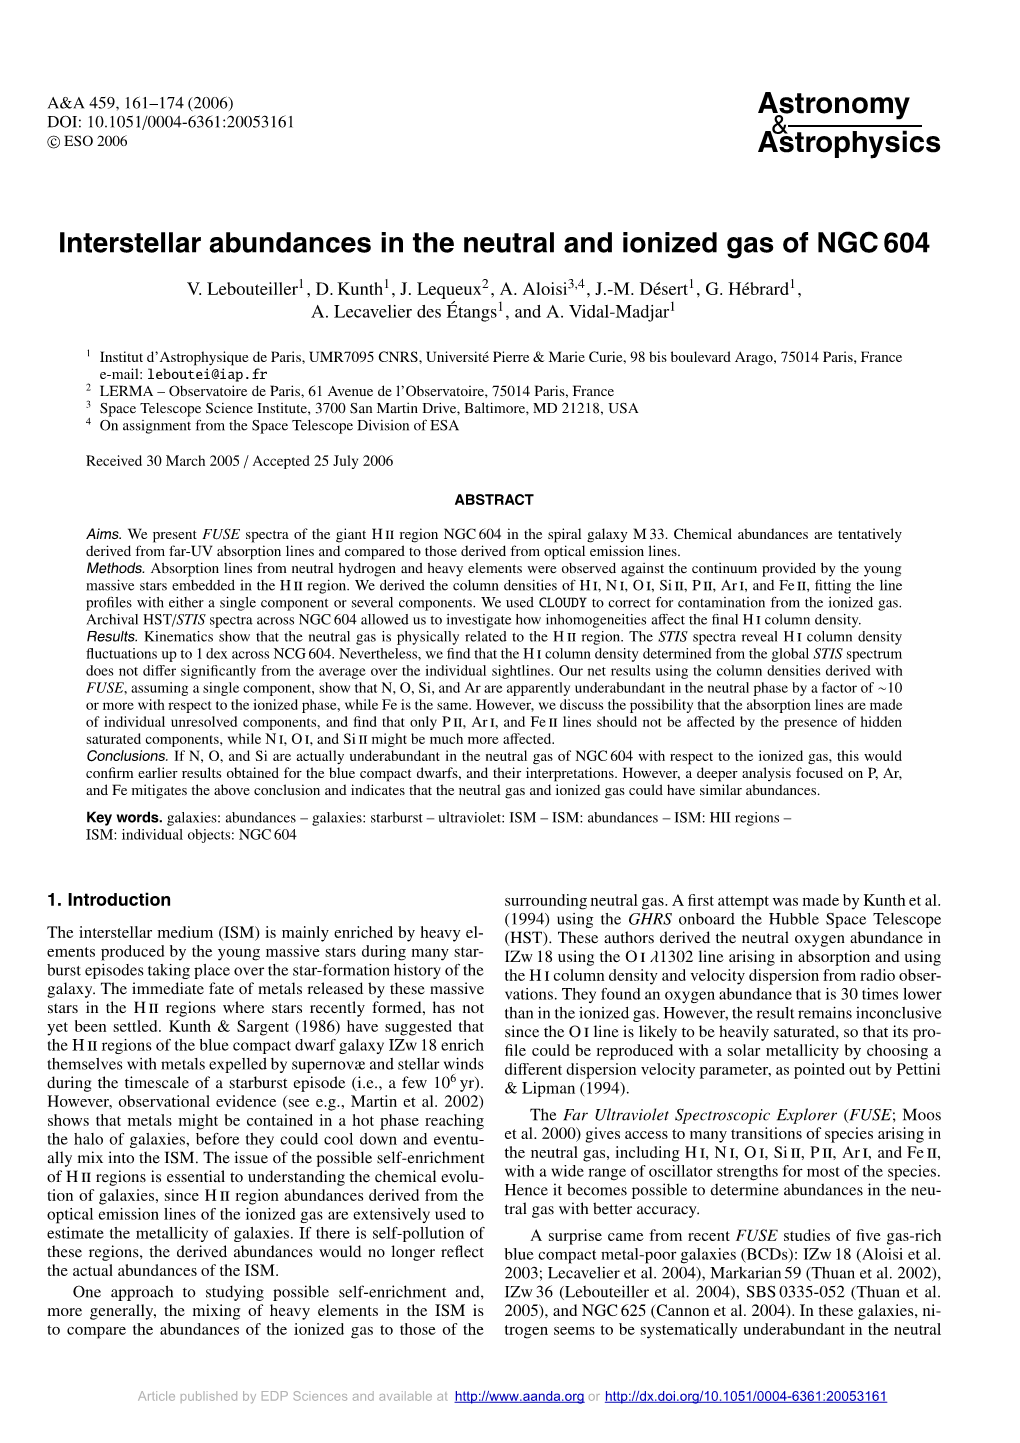 Interstellar Abundances in the Neutral and Ionized Gas of NGC 604